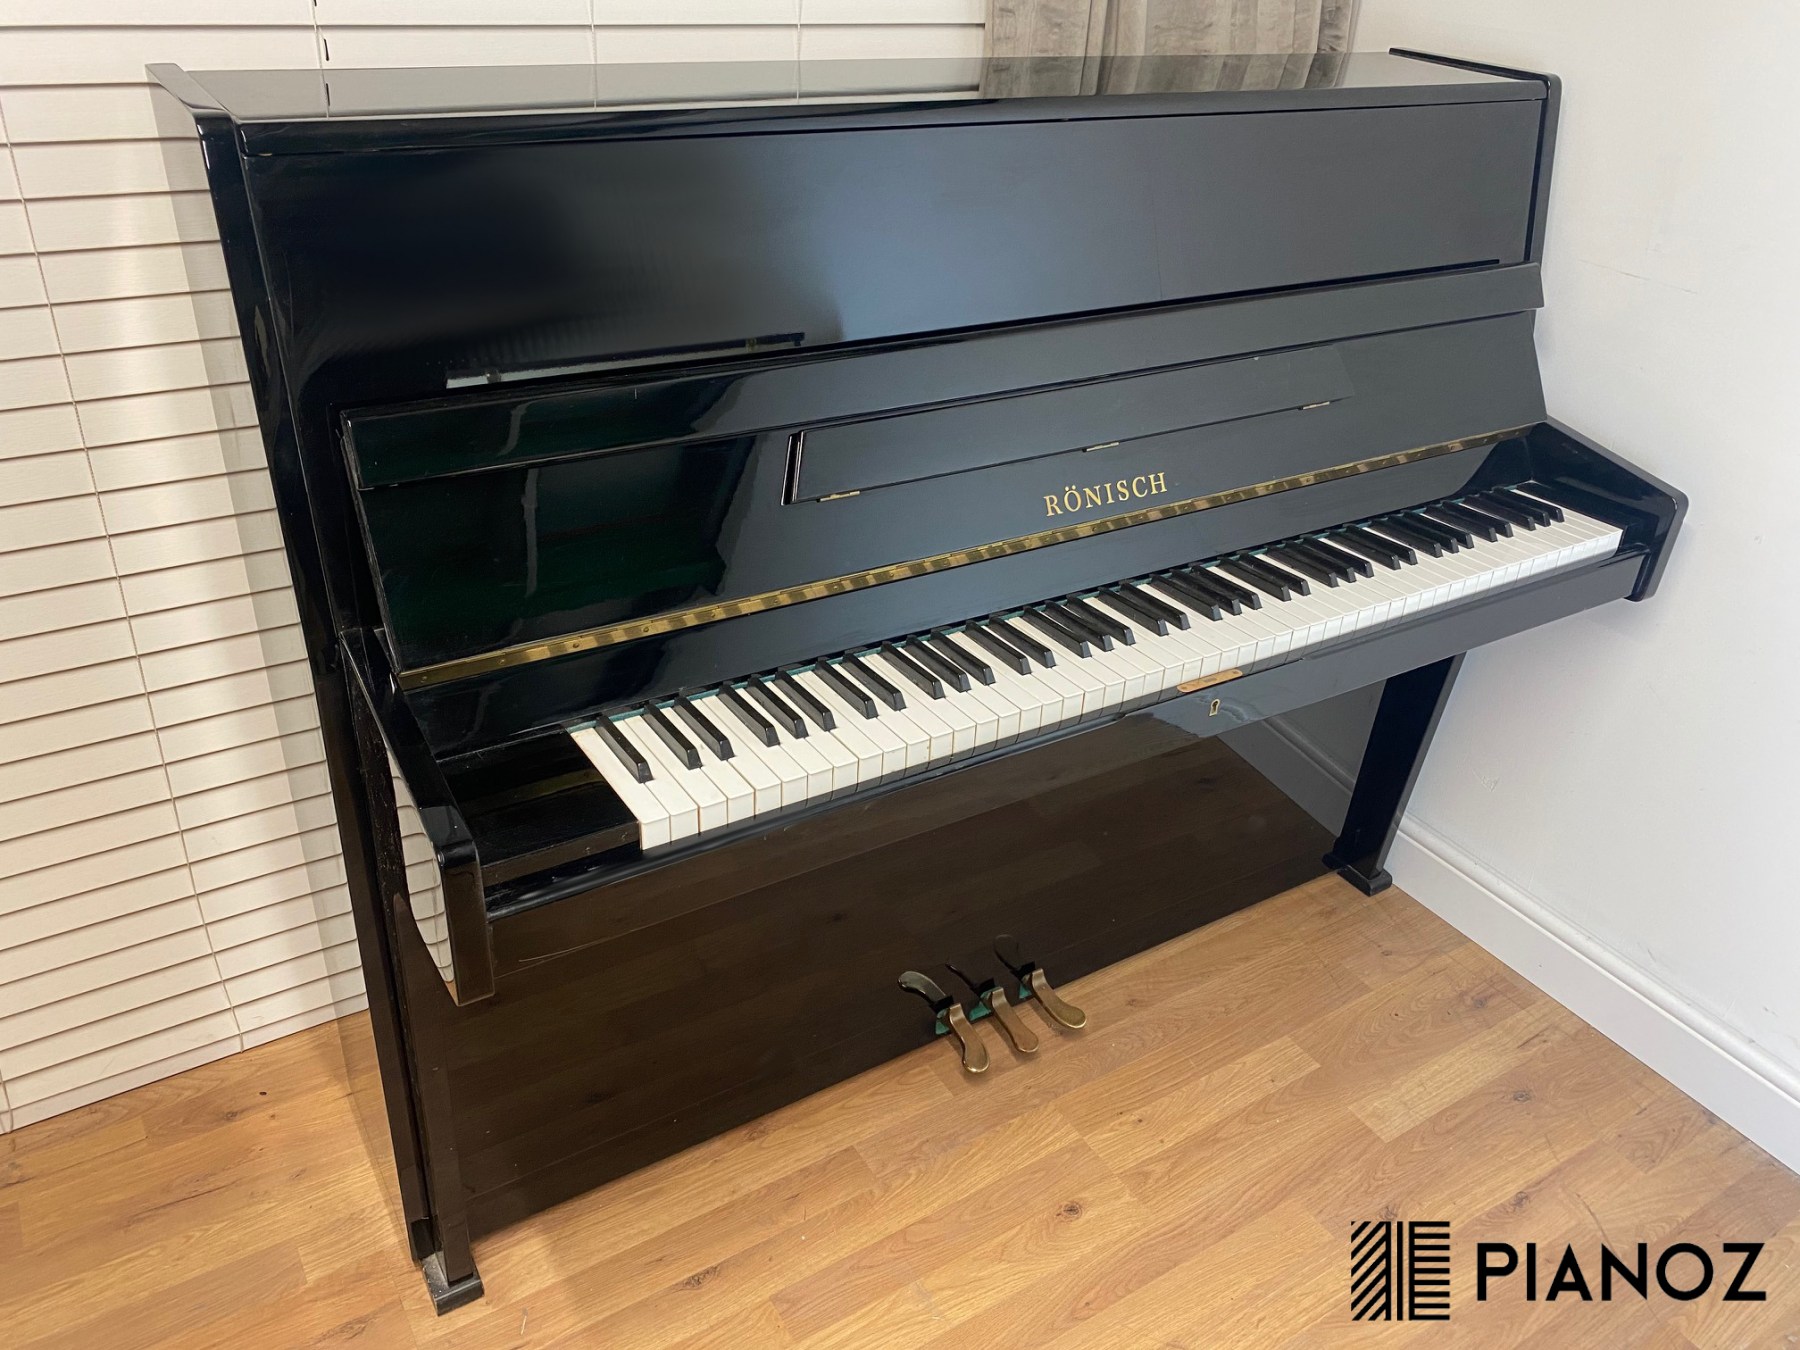 Ronisch 115 Upright Piano piano for sale in UK